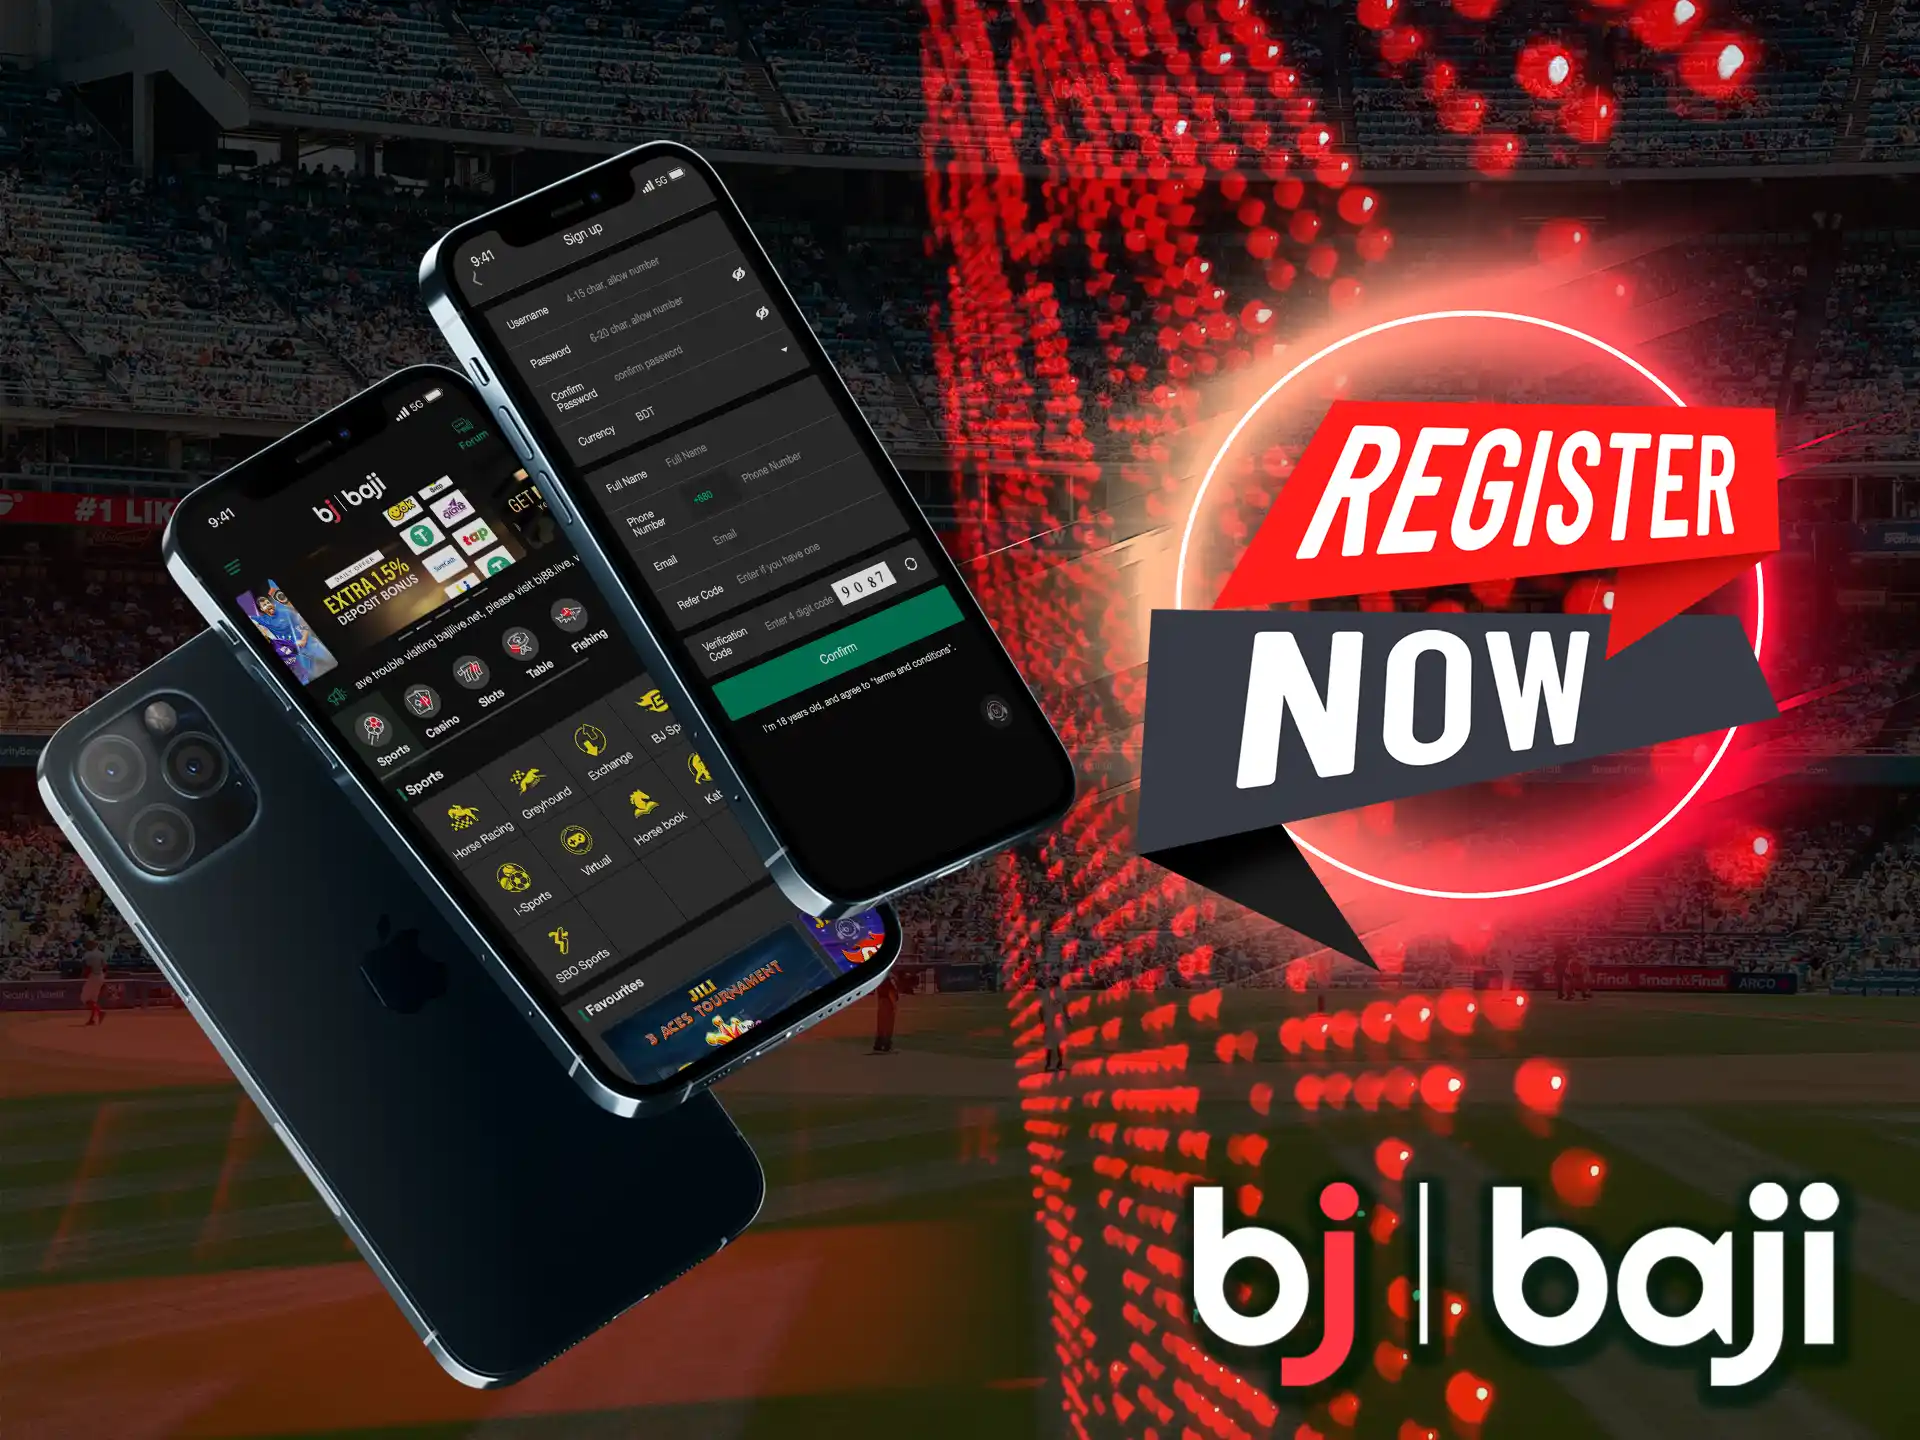 In order to start betting or playing in the casino, you need to create a Baji account, if you have one - just log in there.